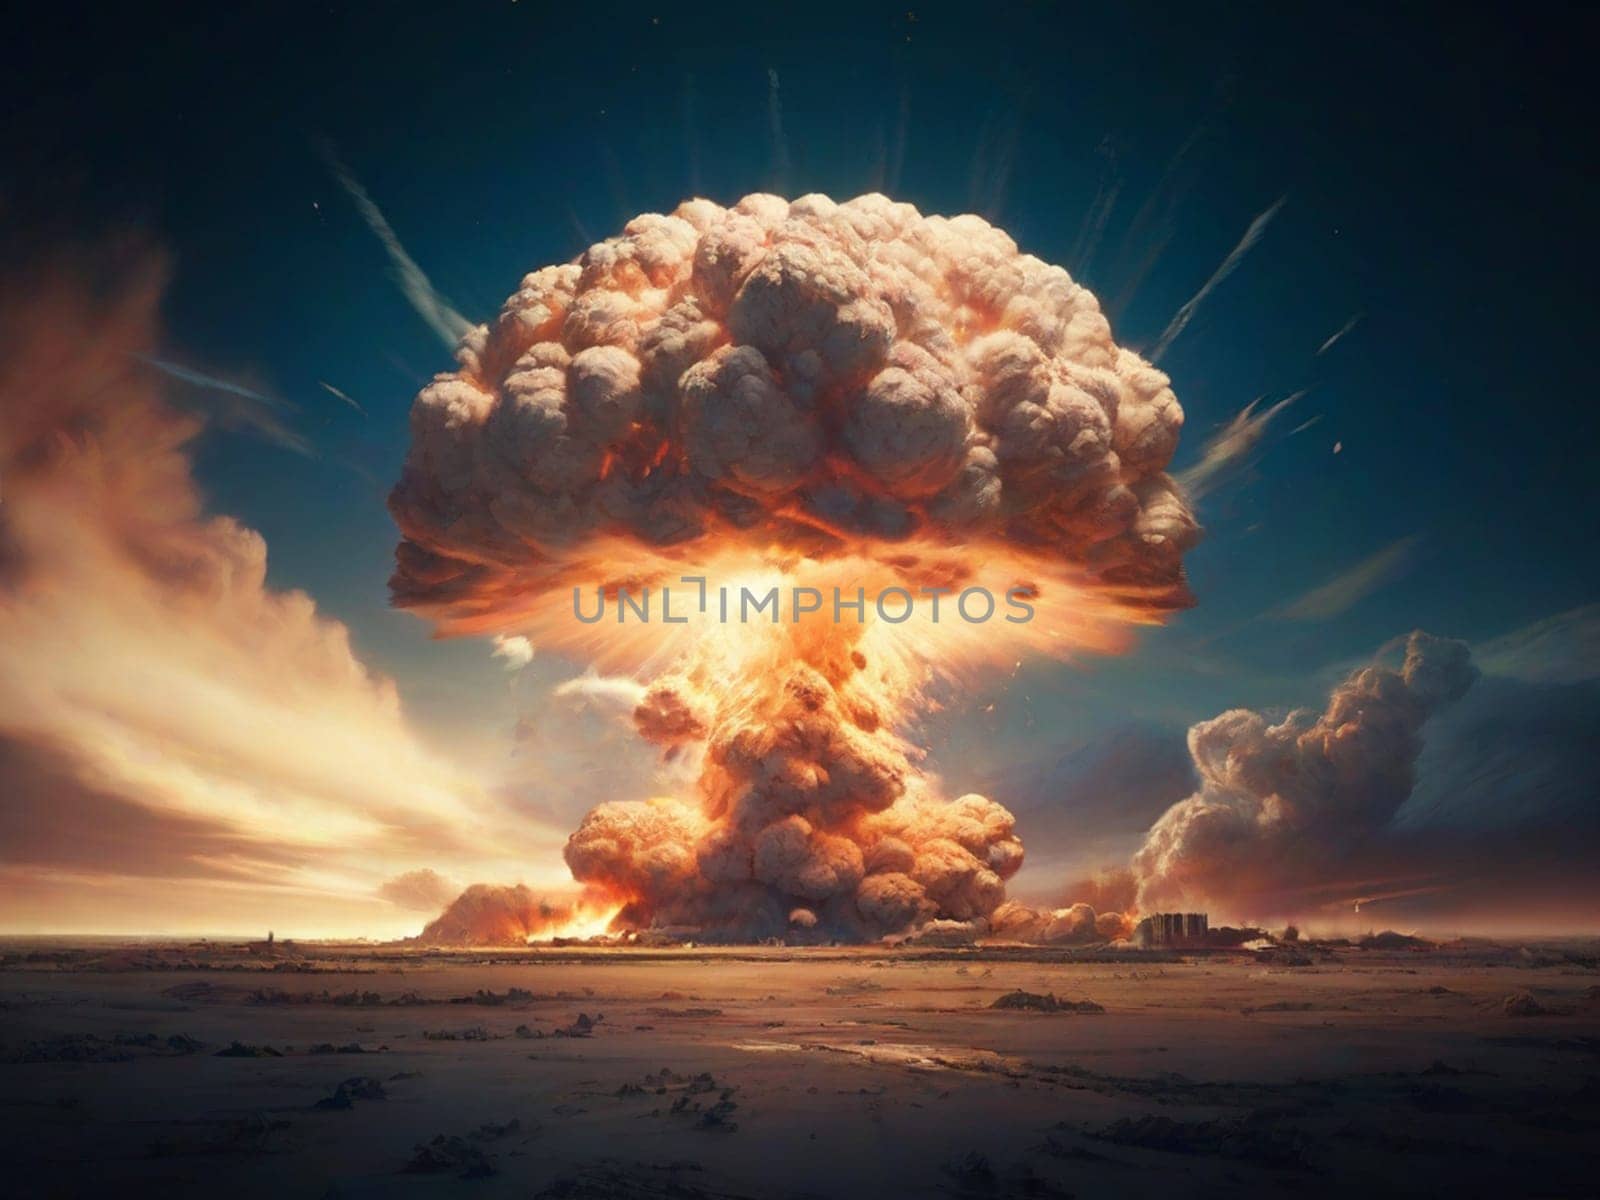 Terrible explosion of a nuclear bomb with a mushroom in the desert. Hydrogen bomb test. Nuclear catastrophe.